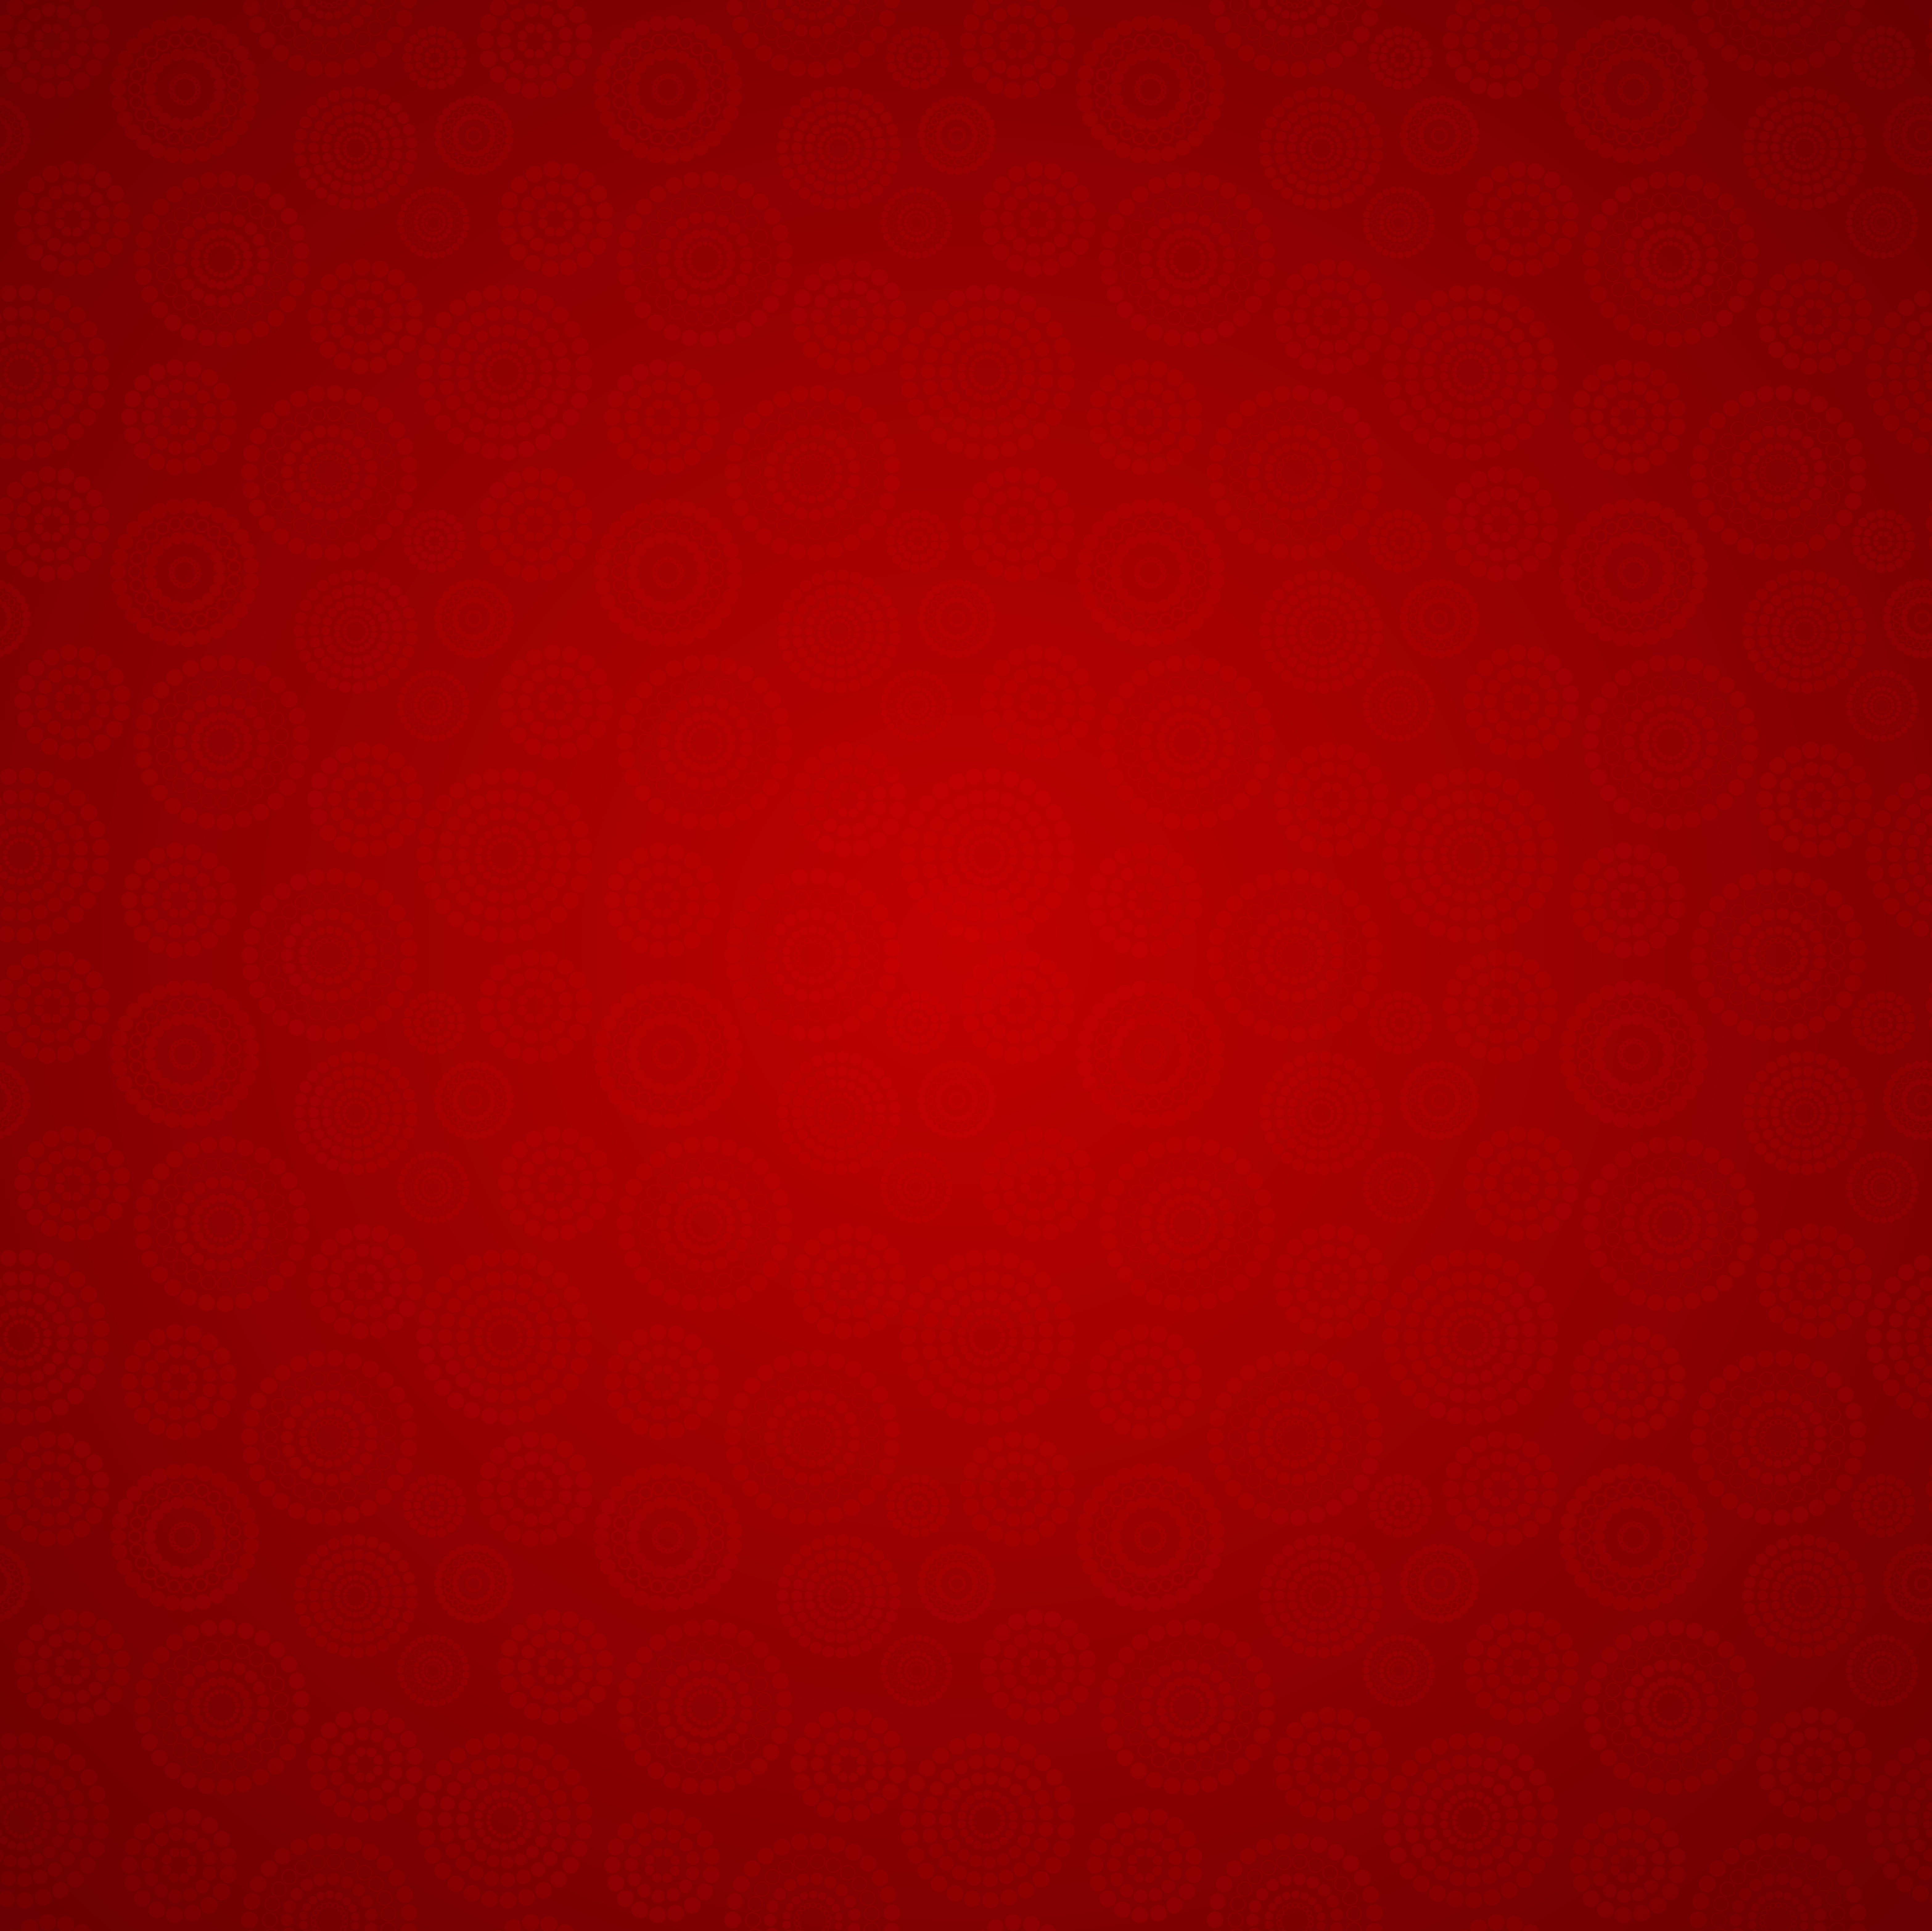 Ornamental Red Background.